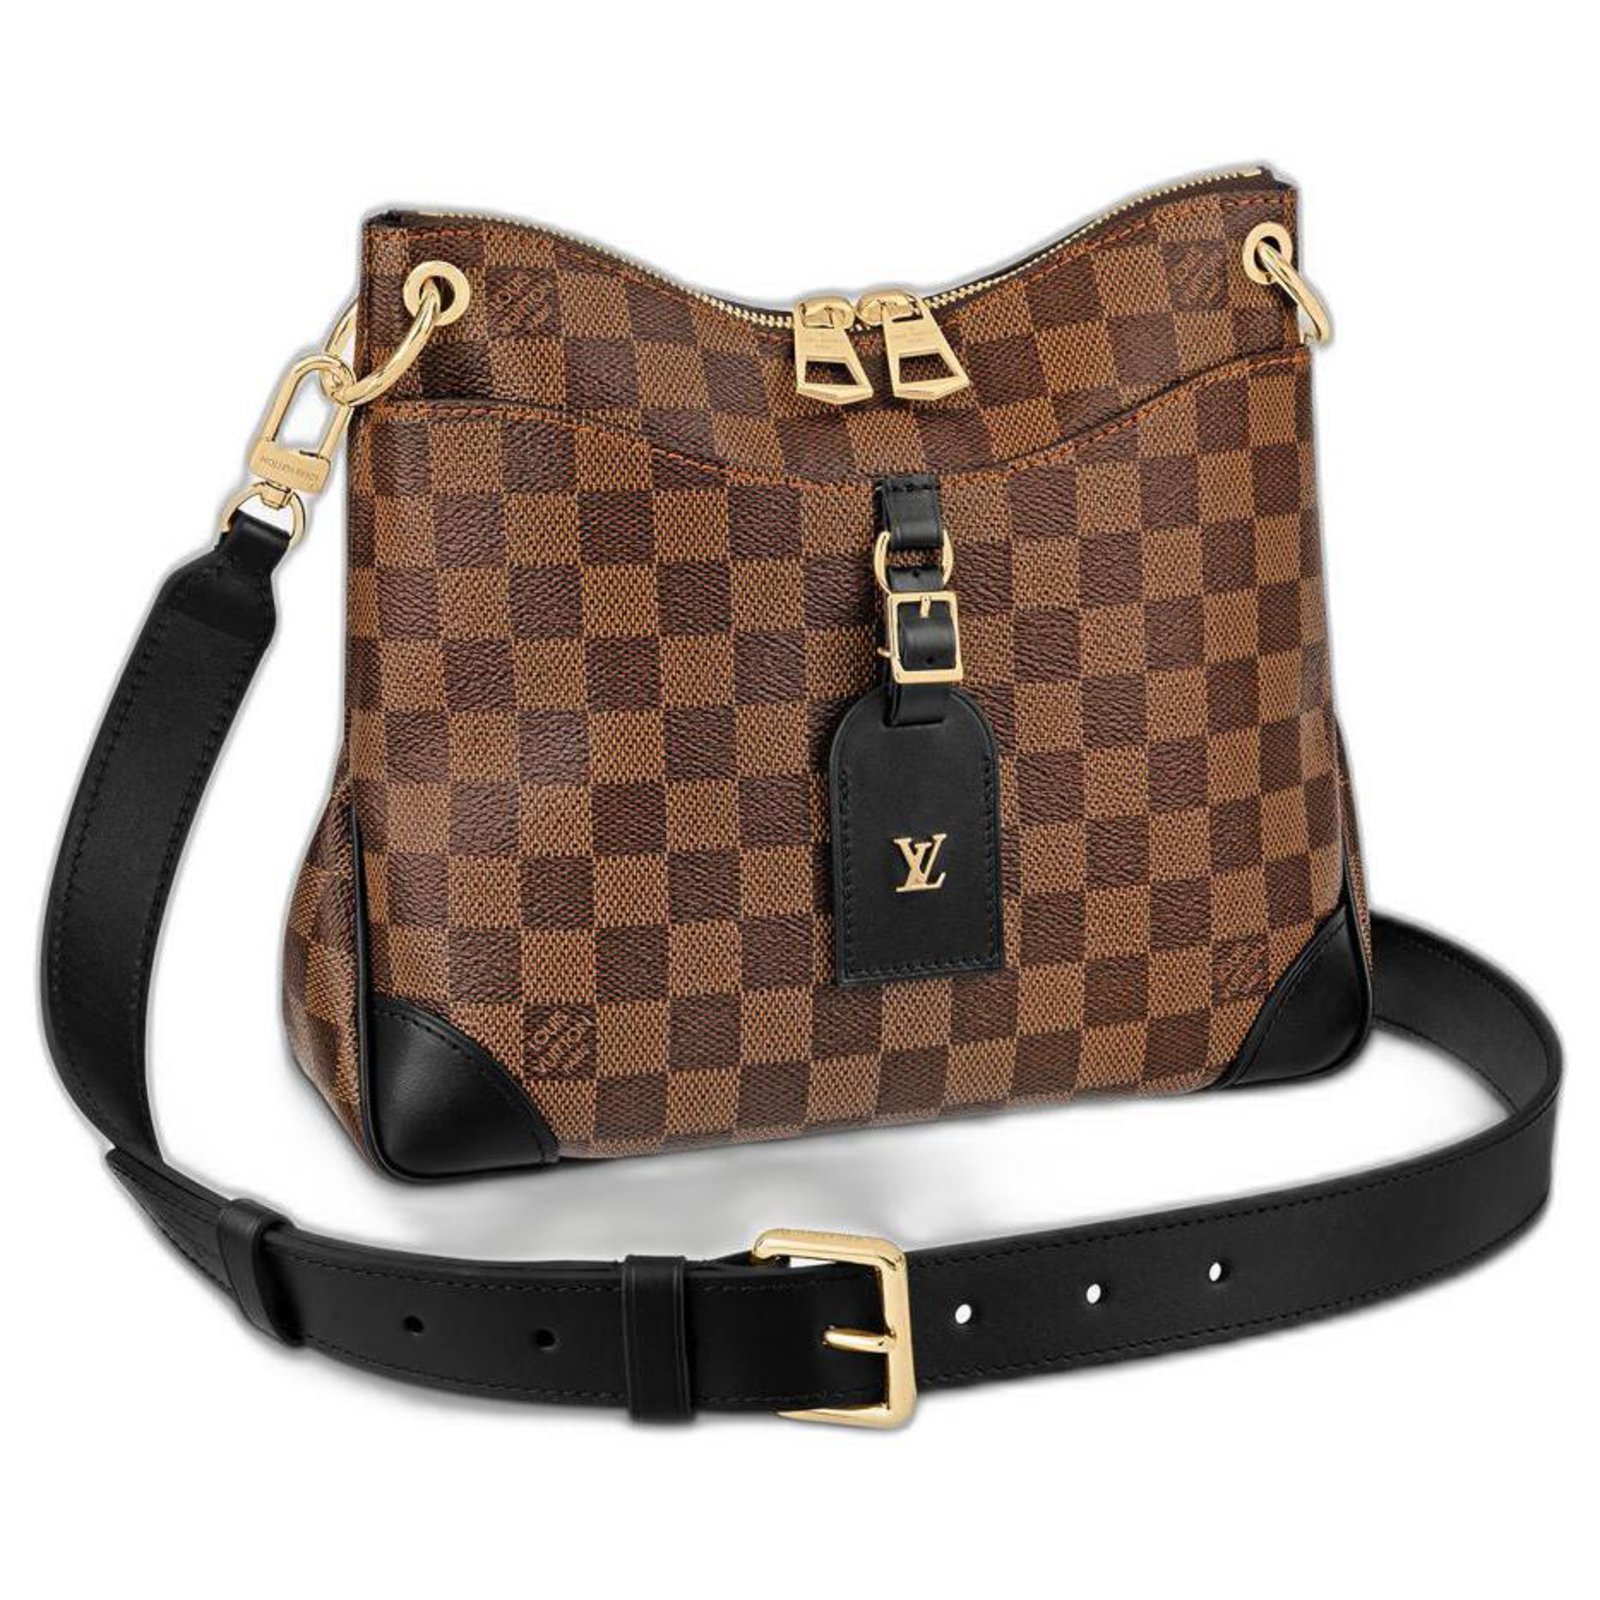 Louis Vuitton Odeon pm tote in depth review, what fits + mod shots on the  body 